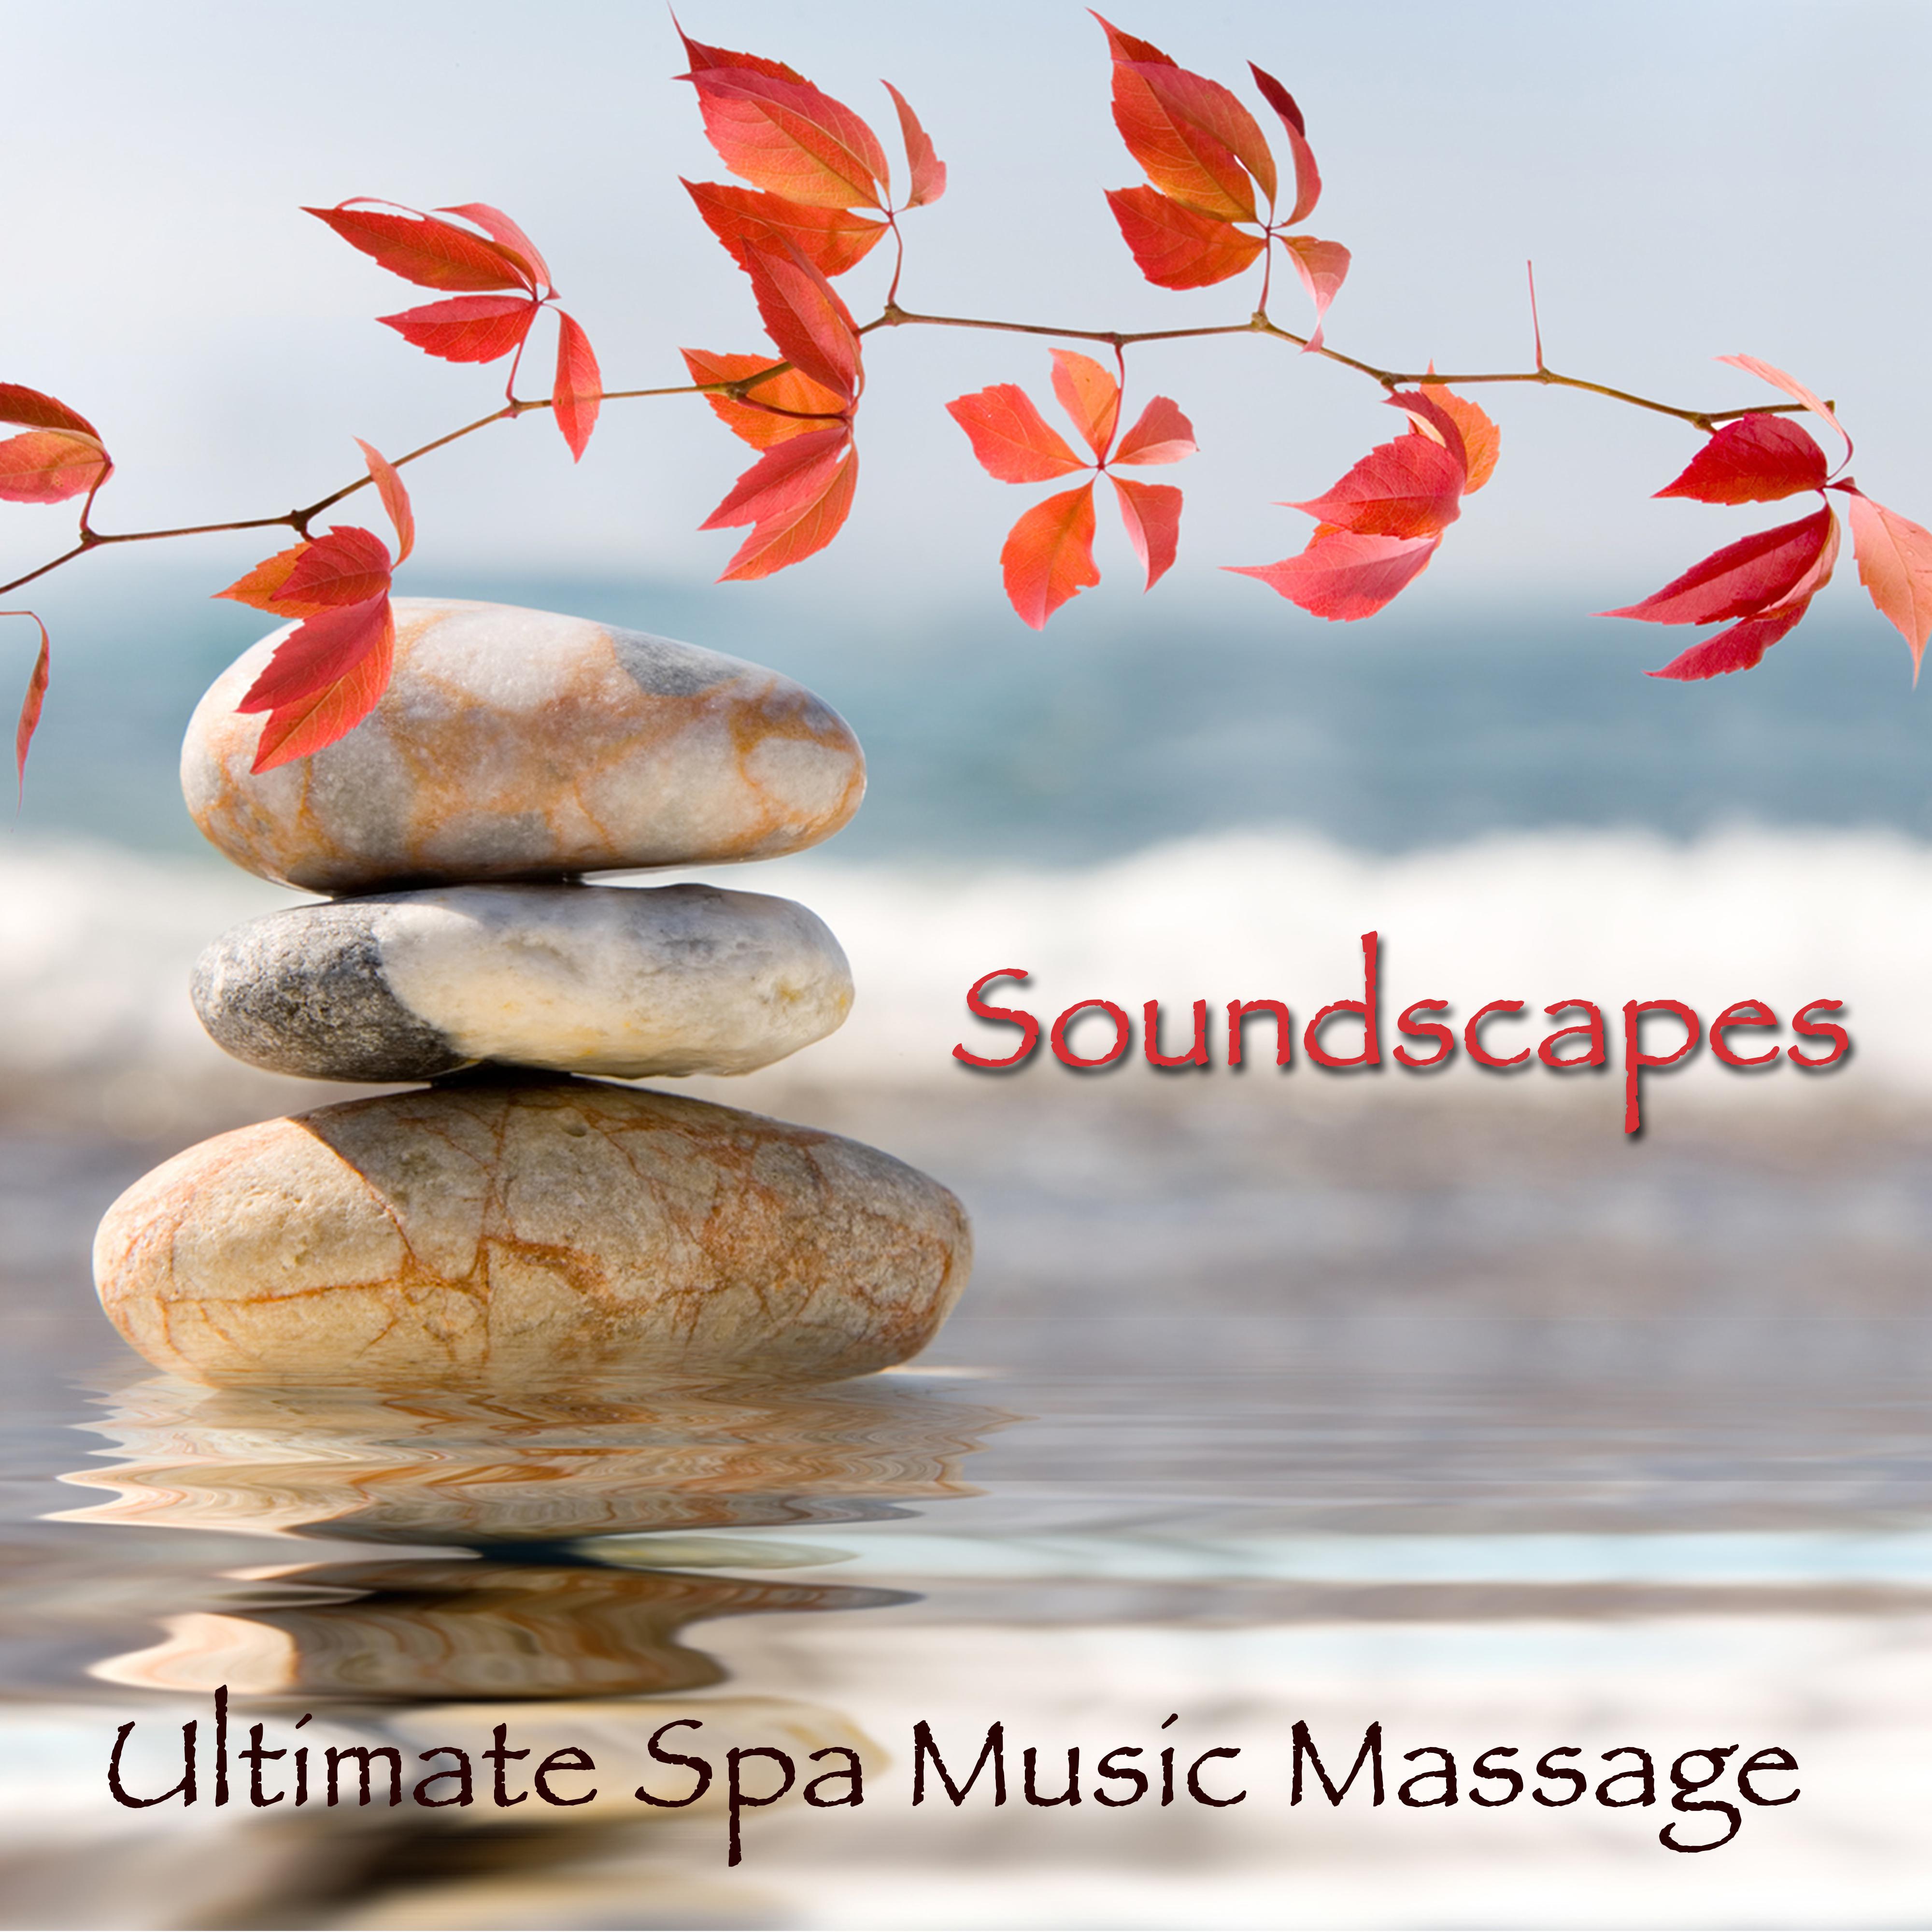 Soundscapes – Ultimate Spa Music Massage Buddha Relaxing Sounds for Day Spa